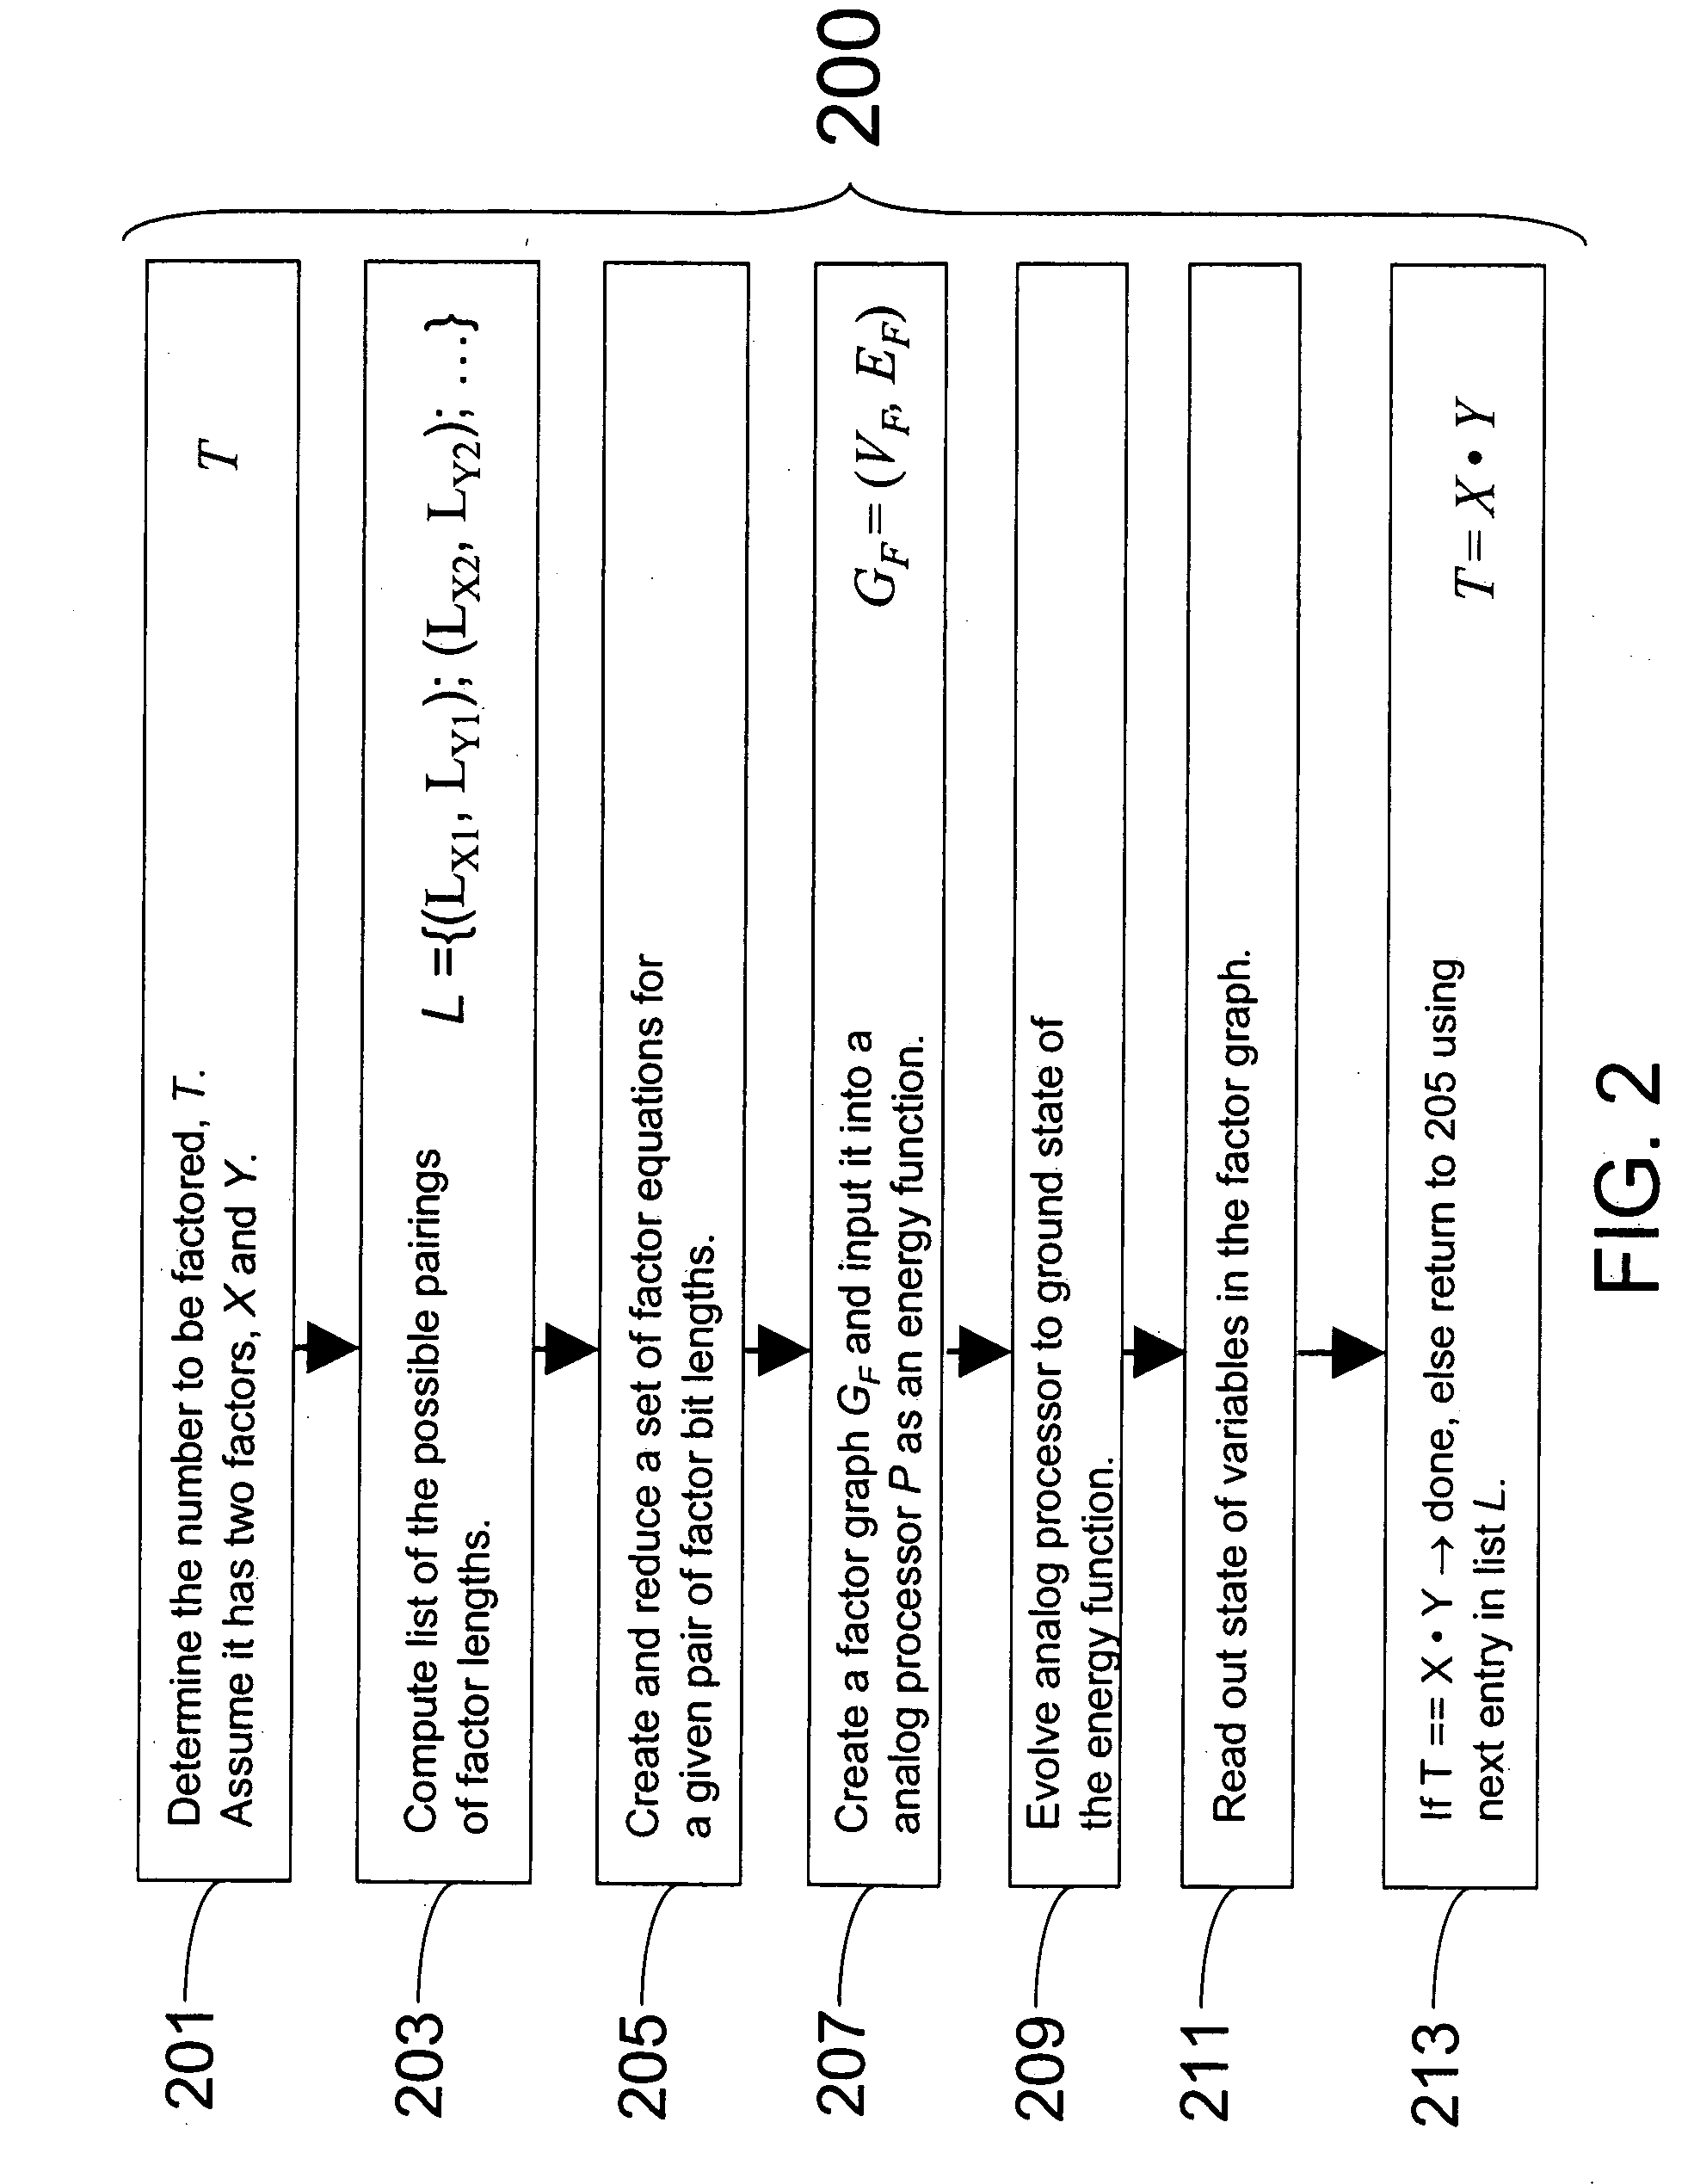 Systems, methods and apparatus for factoring numbers